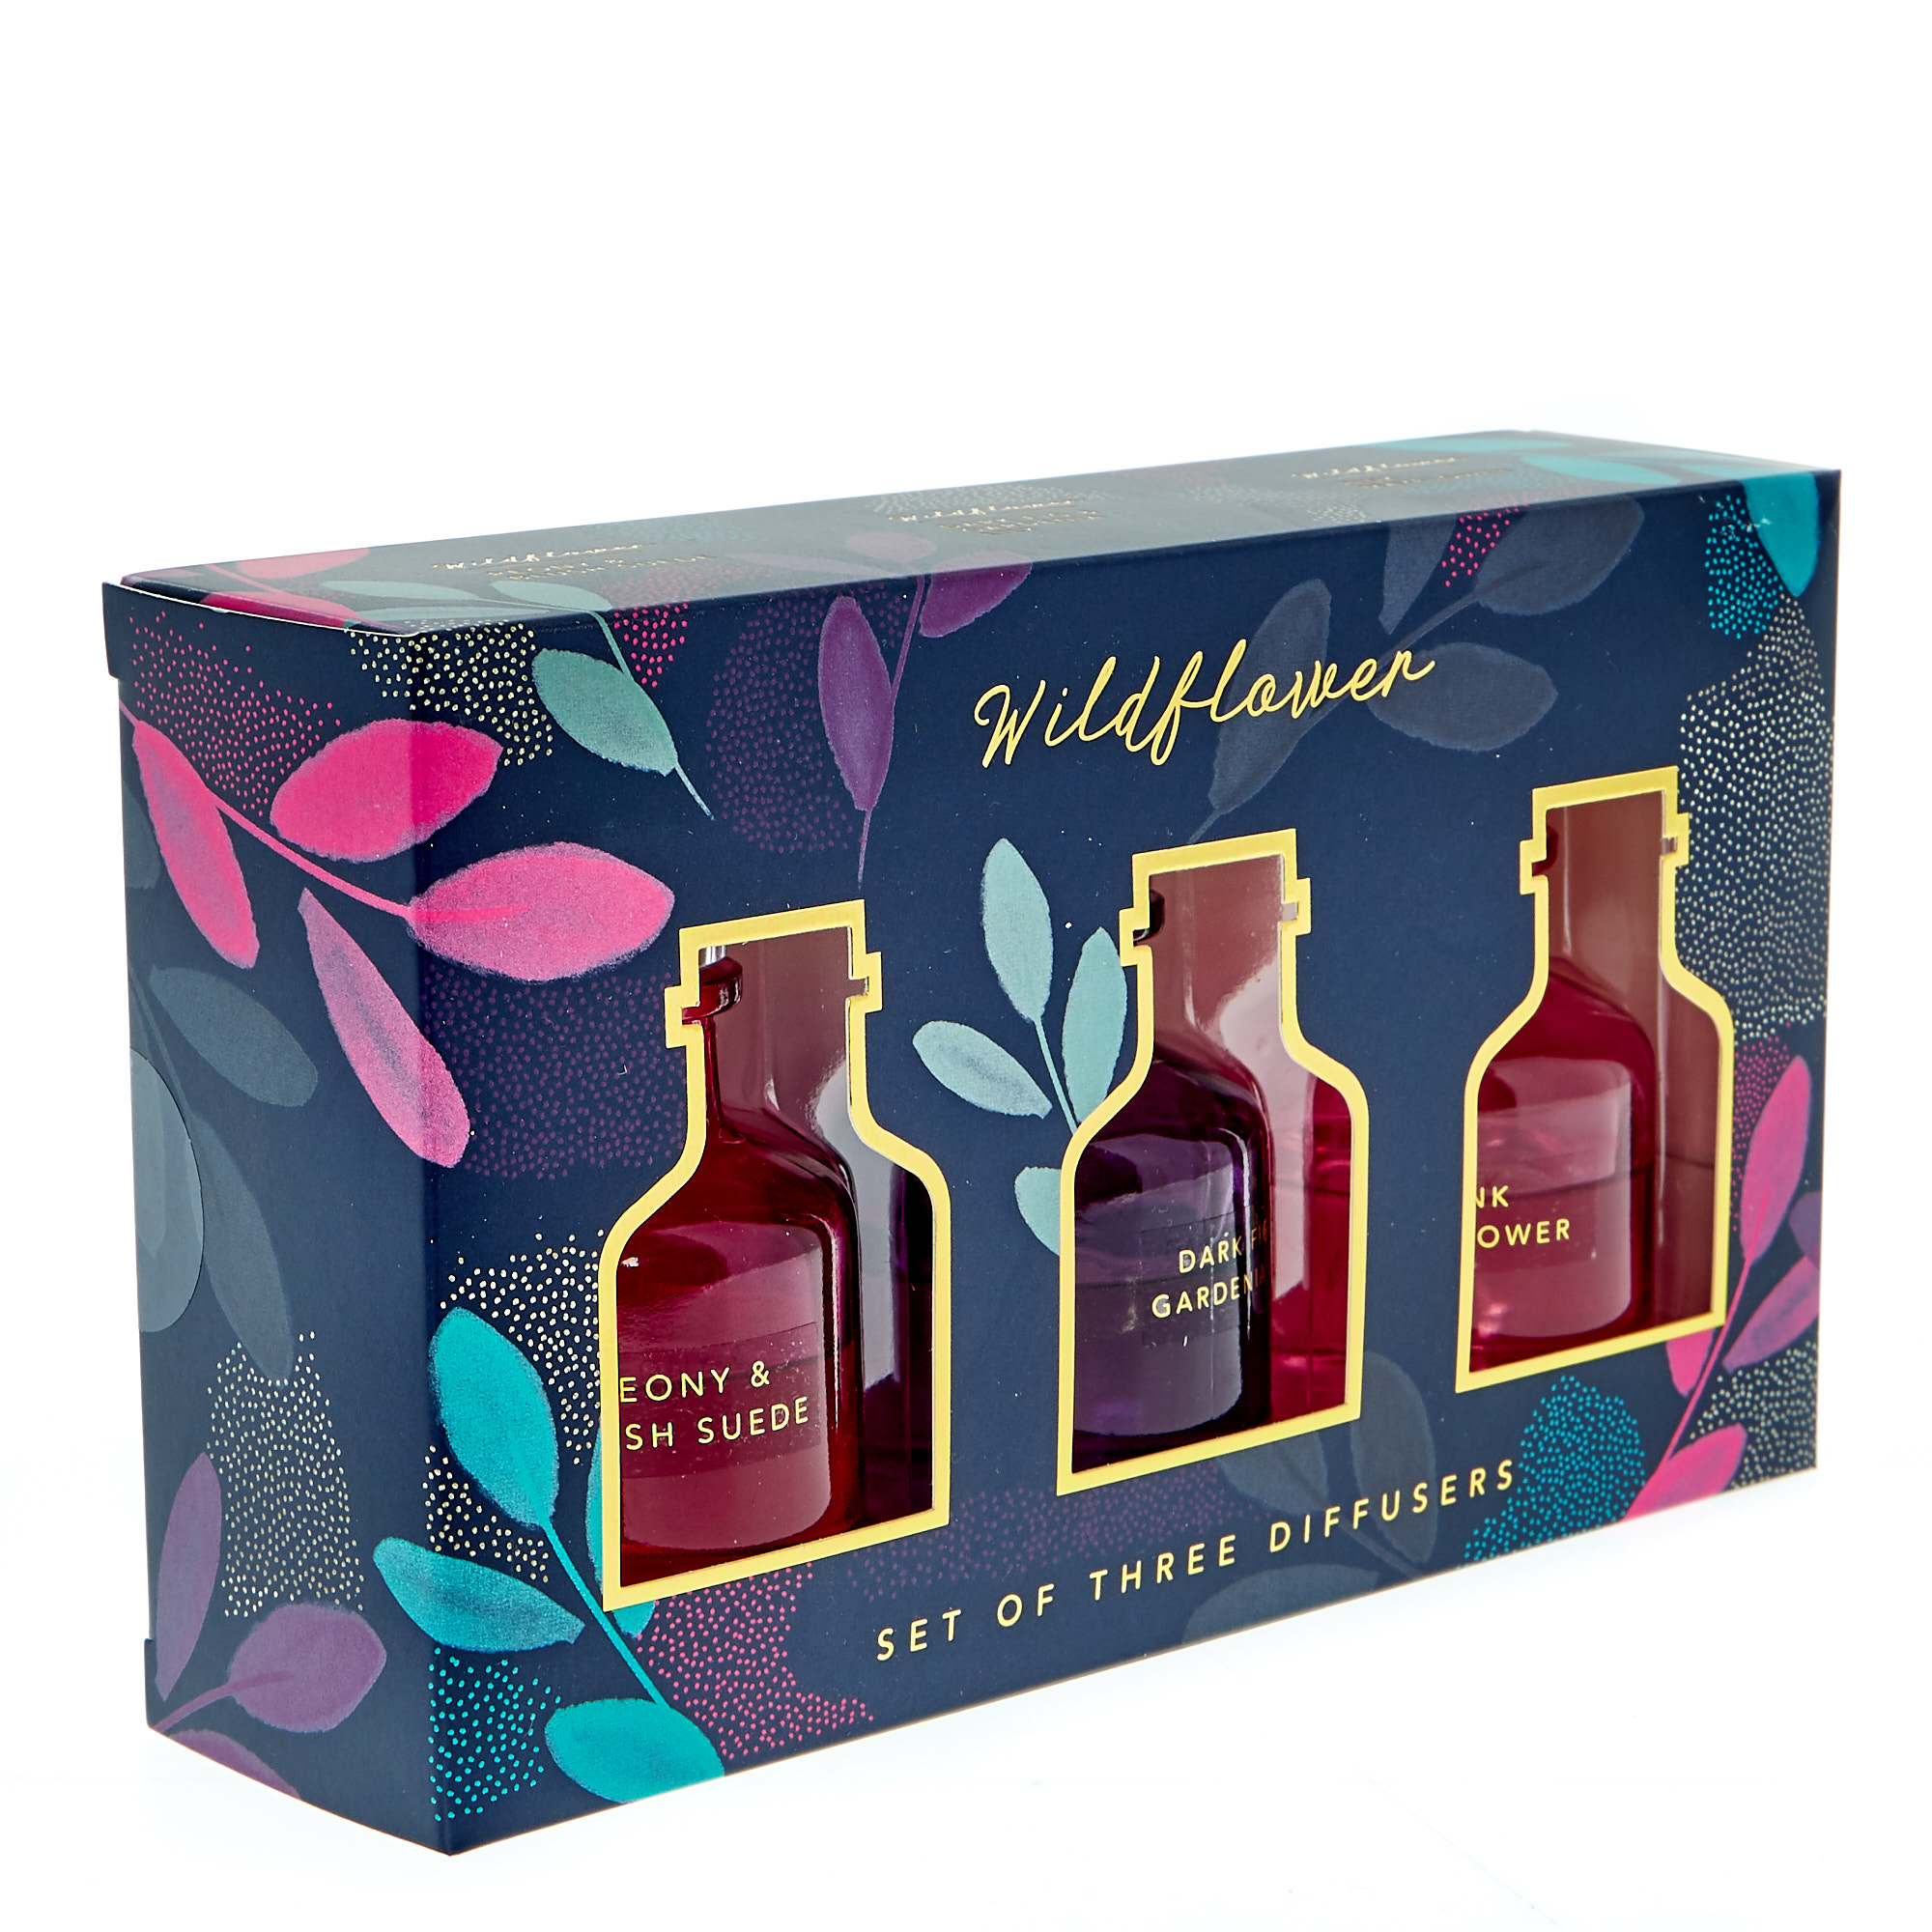 Wildflower Scented Reed Diffusers - Set Of 3